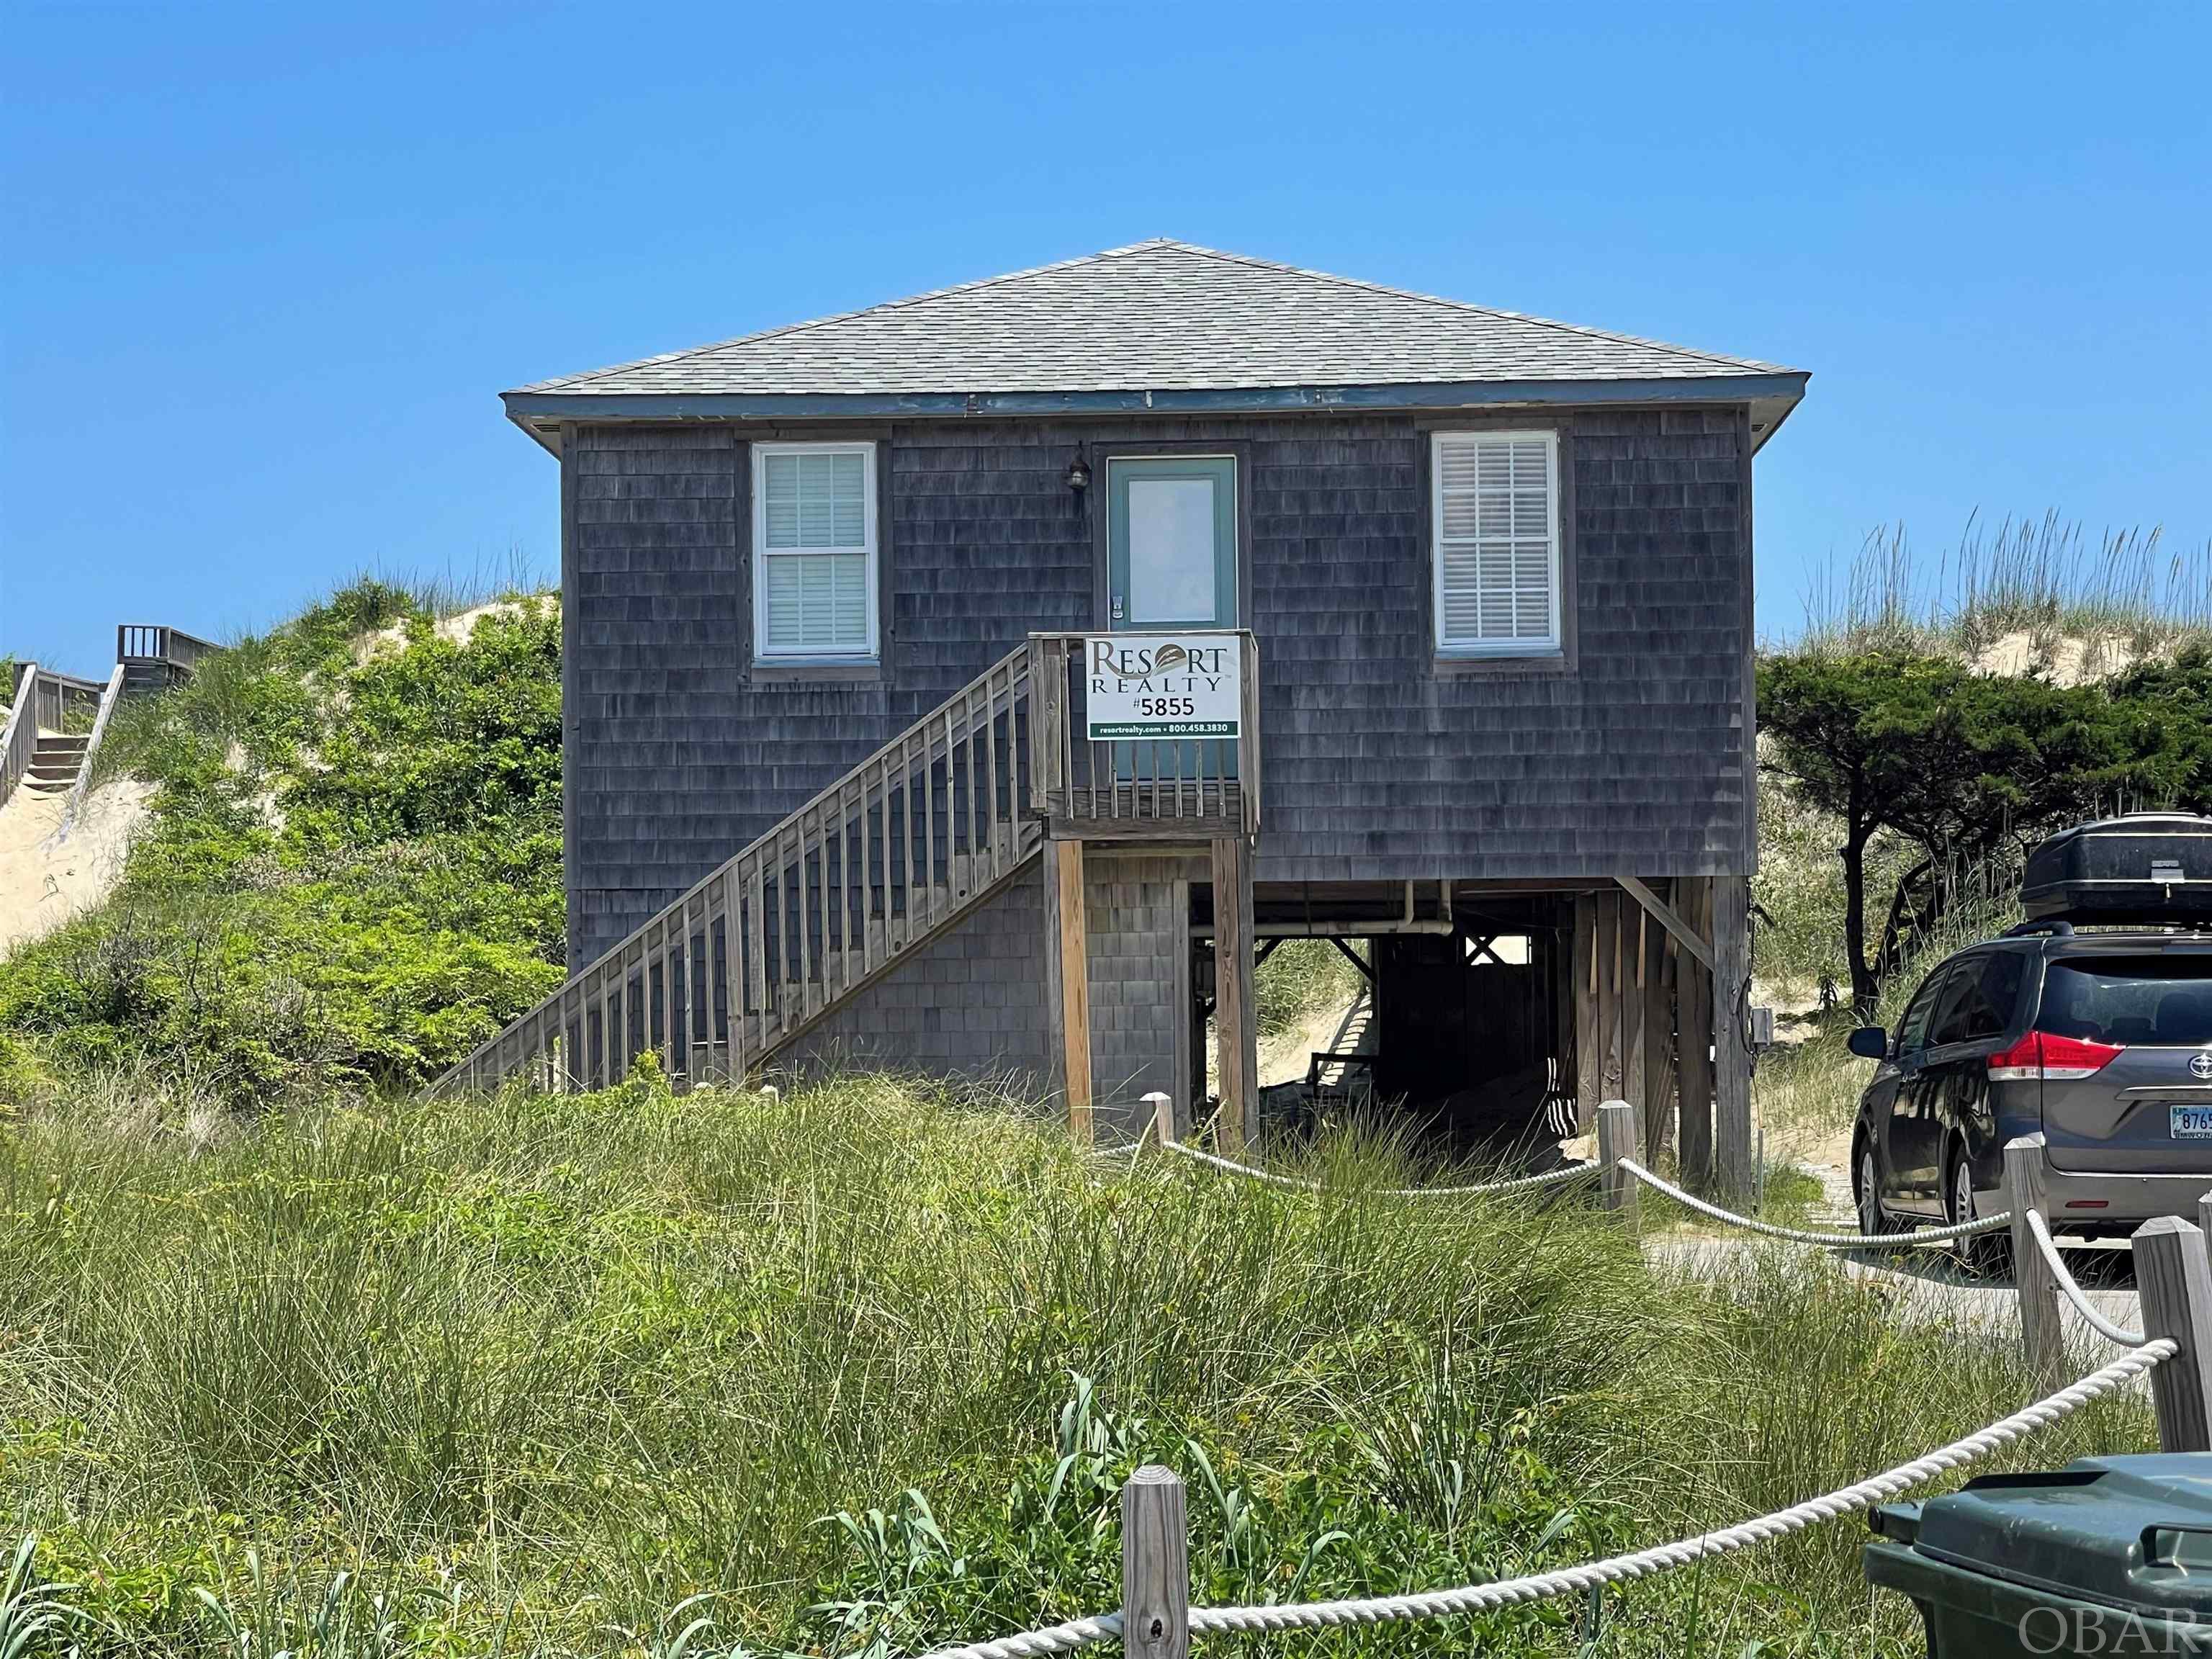 Great, ocean to road, South Nags Head property with beach box style home and a large dune. The property is ideally located at mile post 19 a little more than 1 mile south of the Outer Banks Pier which has one of the best oceanfront restaurant/bars. This 4-bedroom, 2-bath with bonus living/game room was beautifully remodeled in the last three years.  Renovations include, but are not limited to, new cedar shake siding on the entirety of the exterior of the home, new showers, toilets sinks and vanities in both bathrooms, all new appliances in the kitchen with new quartz countertops, new mattresses and furniture in all bedrooms, new flooring throughout, completely new HVAC system and new paint throughout the interior. With a well-established income in both the offseason (through AirBnb) and in season (through Resort Realty) this home offers the perfect opportunity for a vacation home investment. Come and see it for yourself.   Rental Income estimates vary from firm to firm and may include money that does not go to the owner, such as cleaning fees, administrative charges or services. Buyers are encouraged to investigate how rates, fees, commissions, regulations and policies apply to specific properties before expiration of the due diligence period. It is the buyer's responsibility to determine and execute a rental management contract that best suits their needs. VRBO, Air BnB and similar rent by owner websites are handled differently. Consult legal counsel regarding rental disbursement. Additionally, the Buyer is advised to check on any short-term rental restrictions.